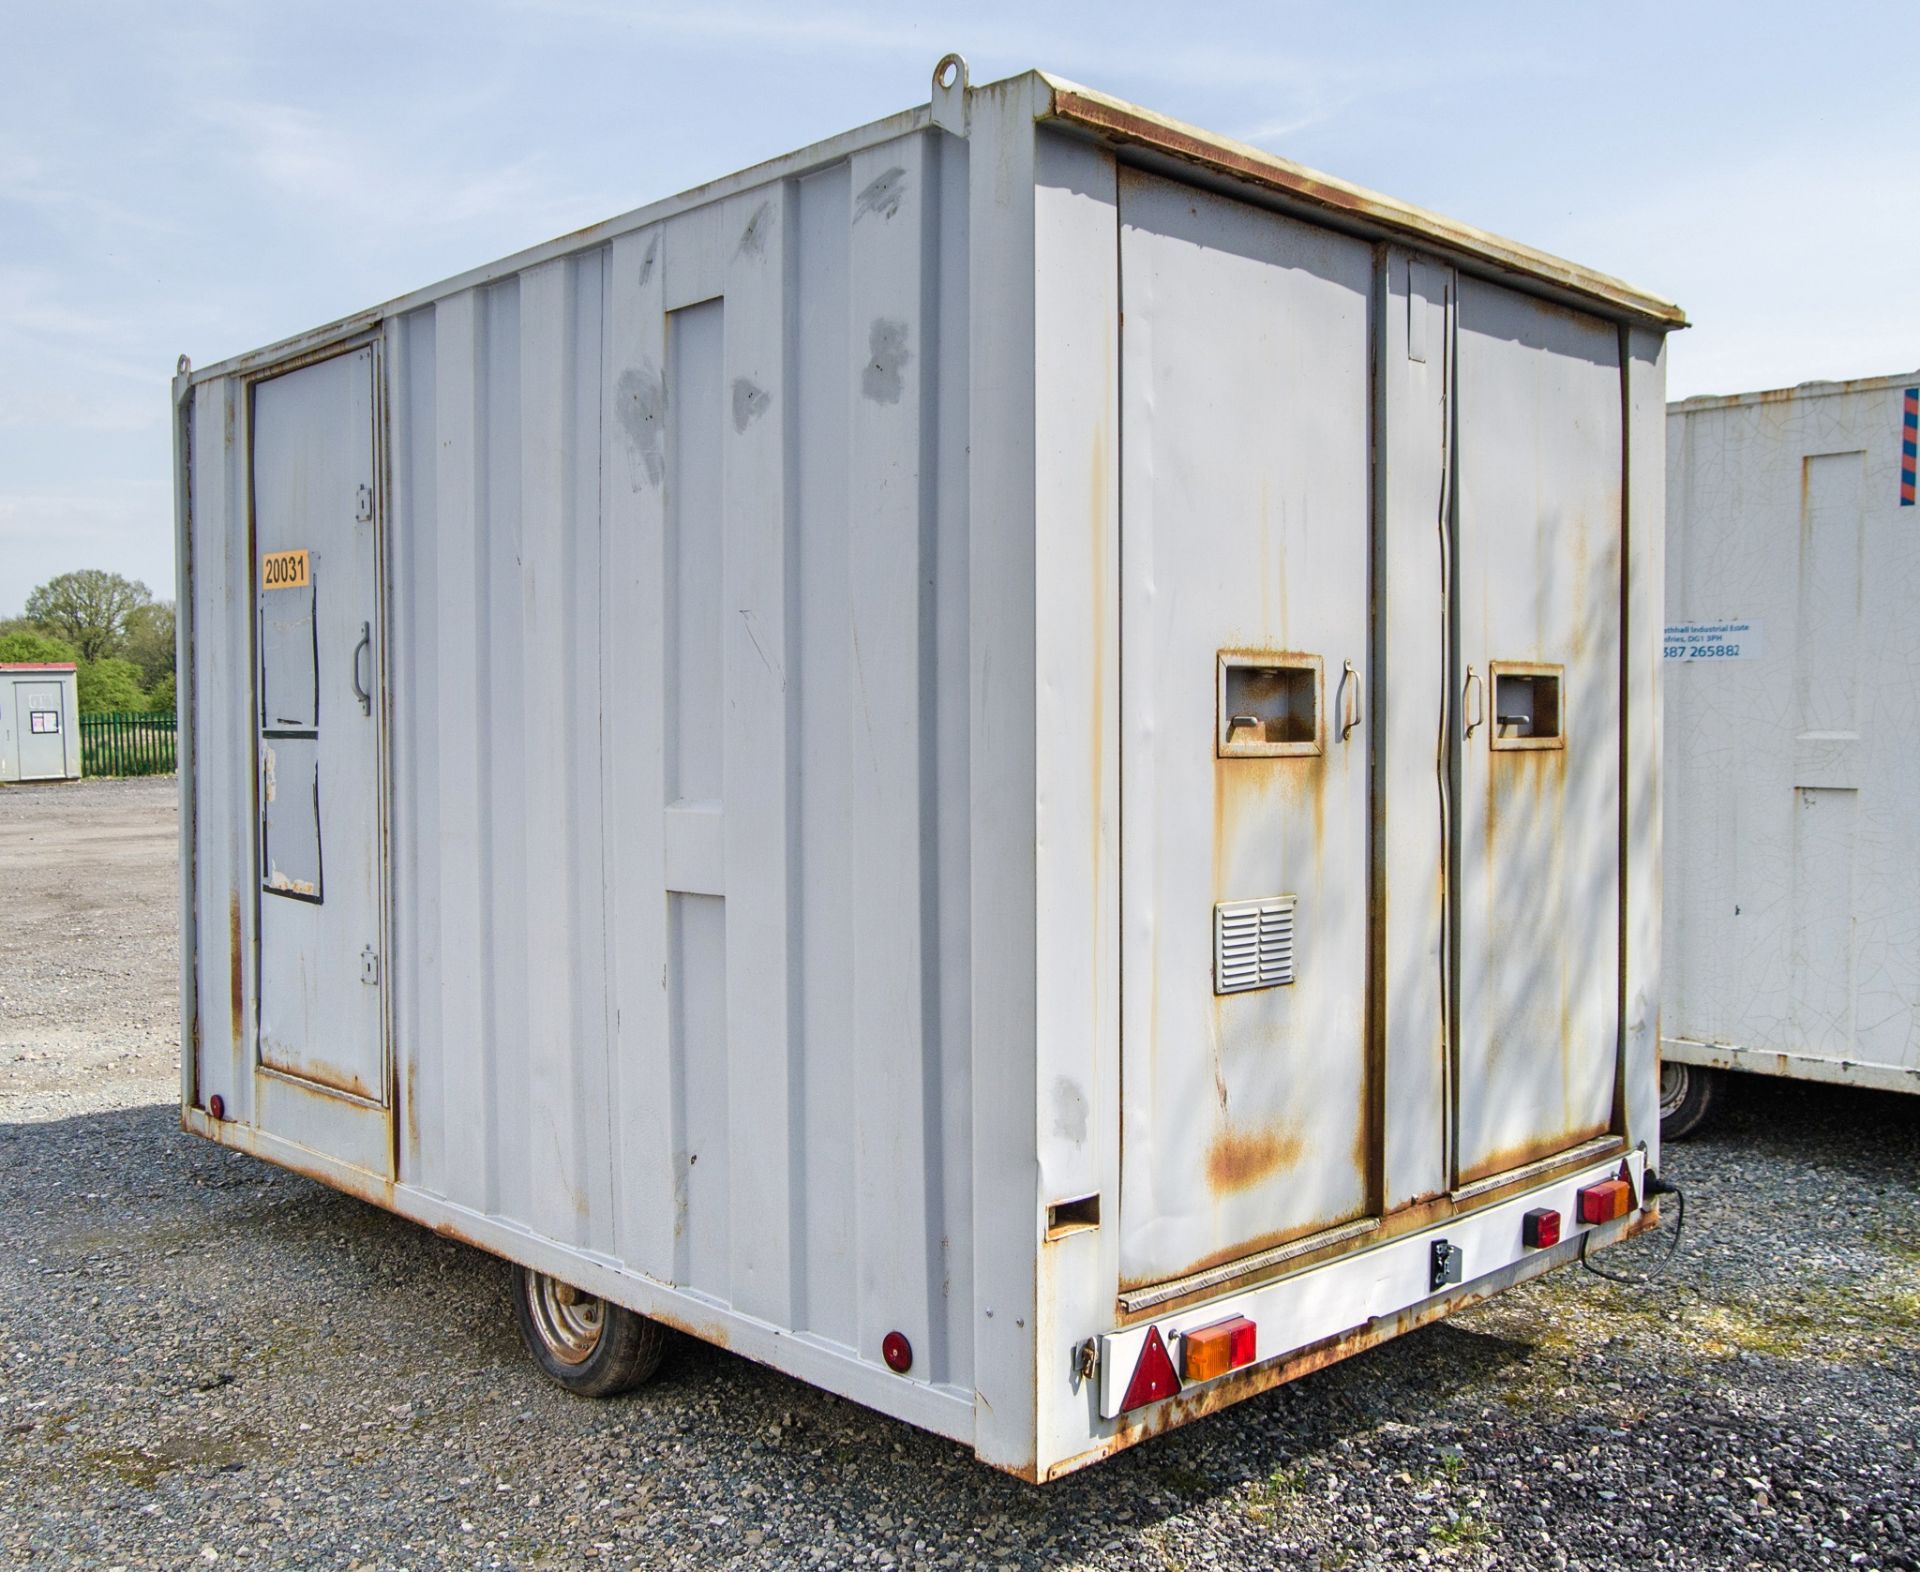 Groundhog 12ft x 8ft steel anti-vandal mobile welfare site unit Comprising of: canteen area, - Image 4 of 12